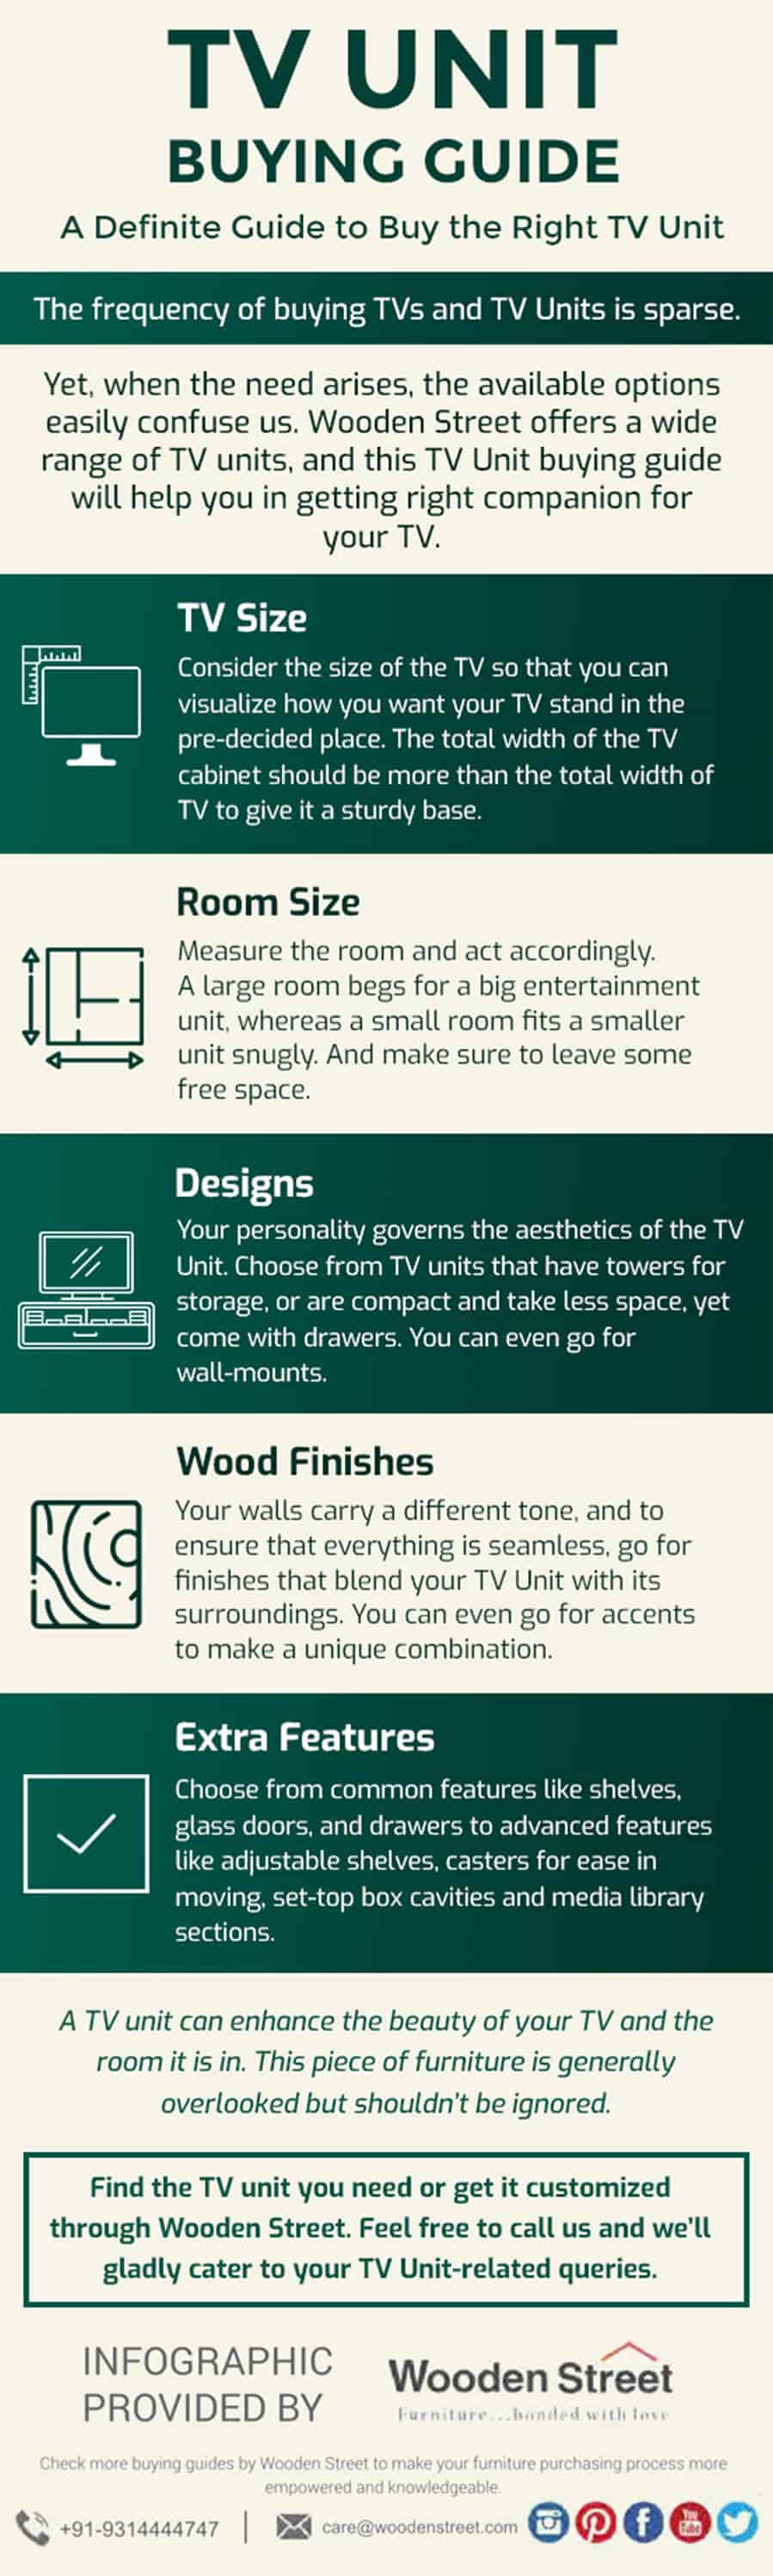 TV Unit Buying Guide